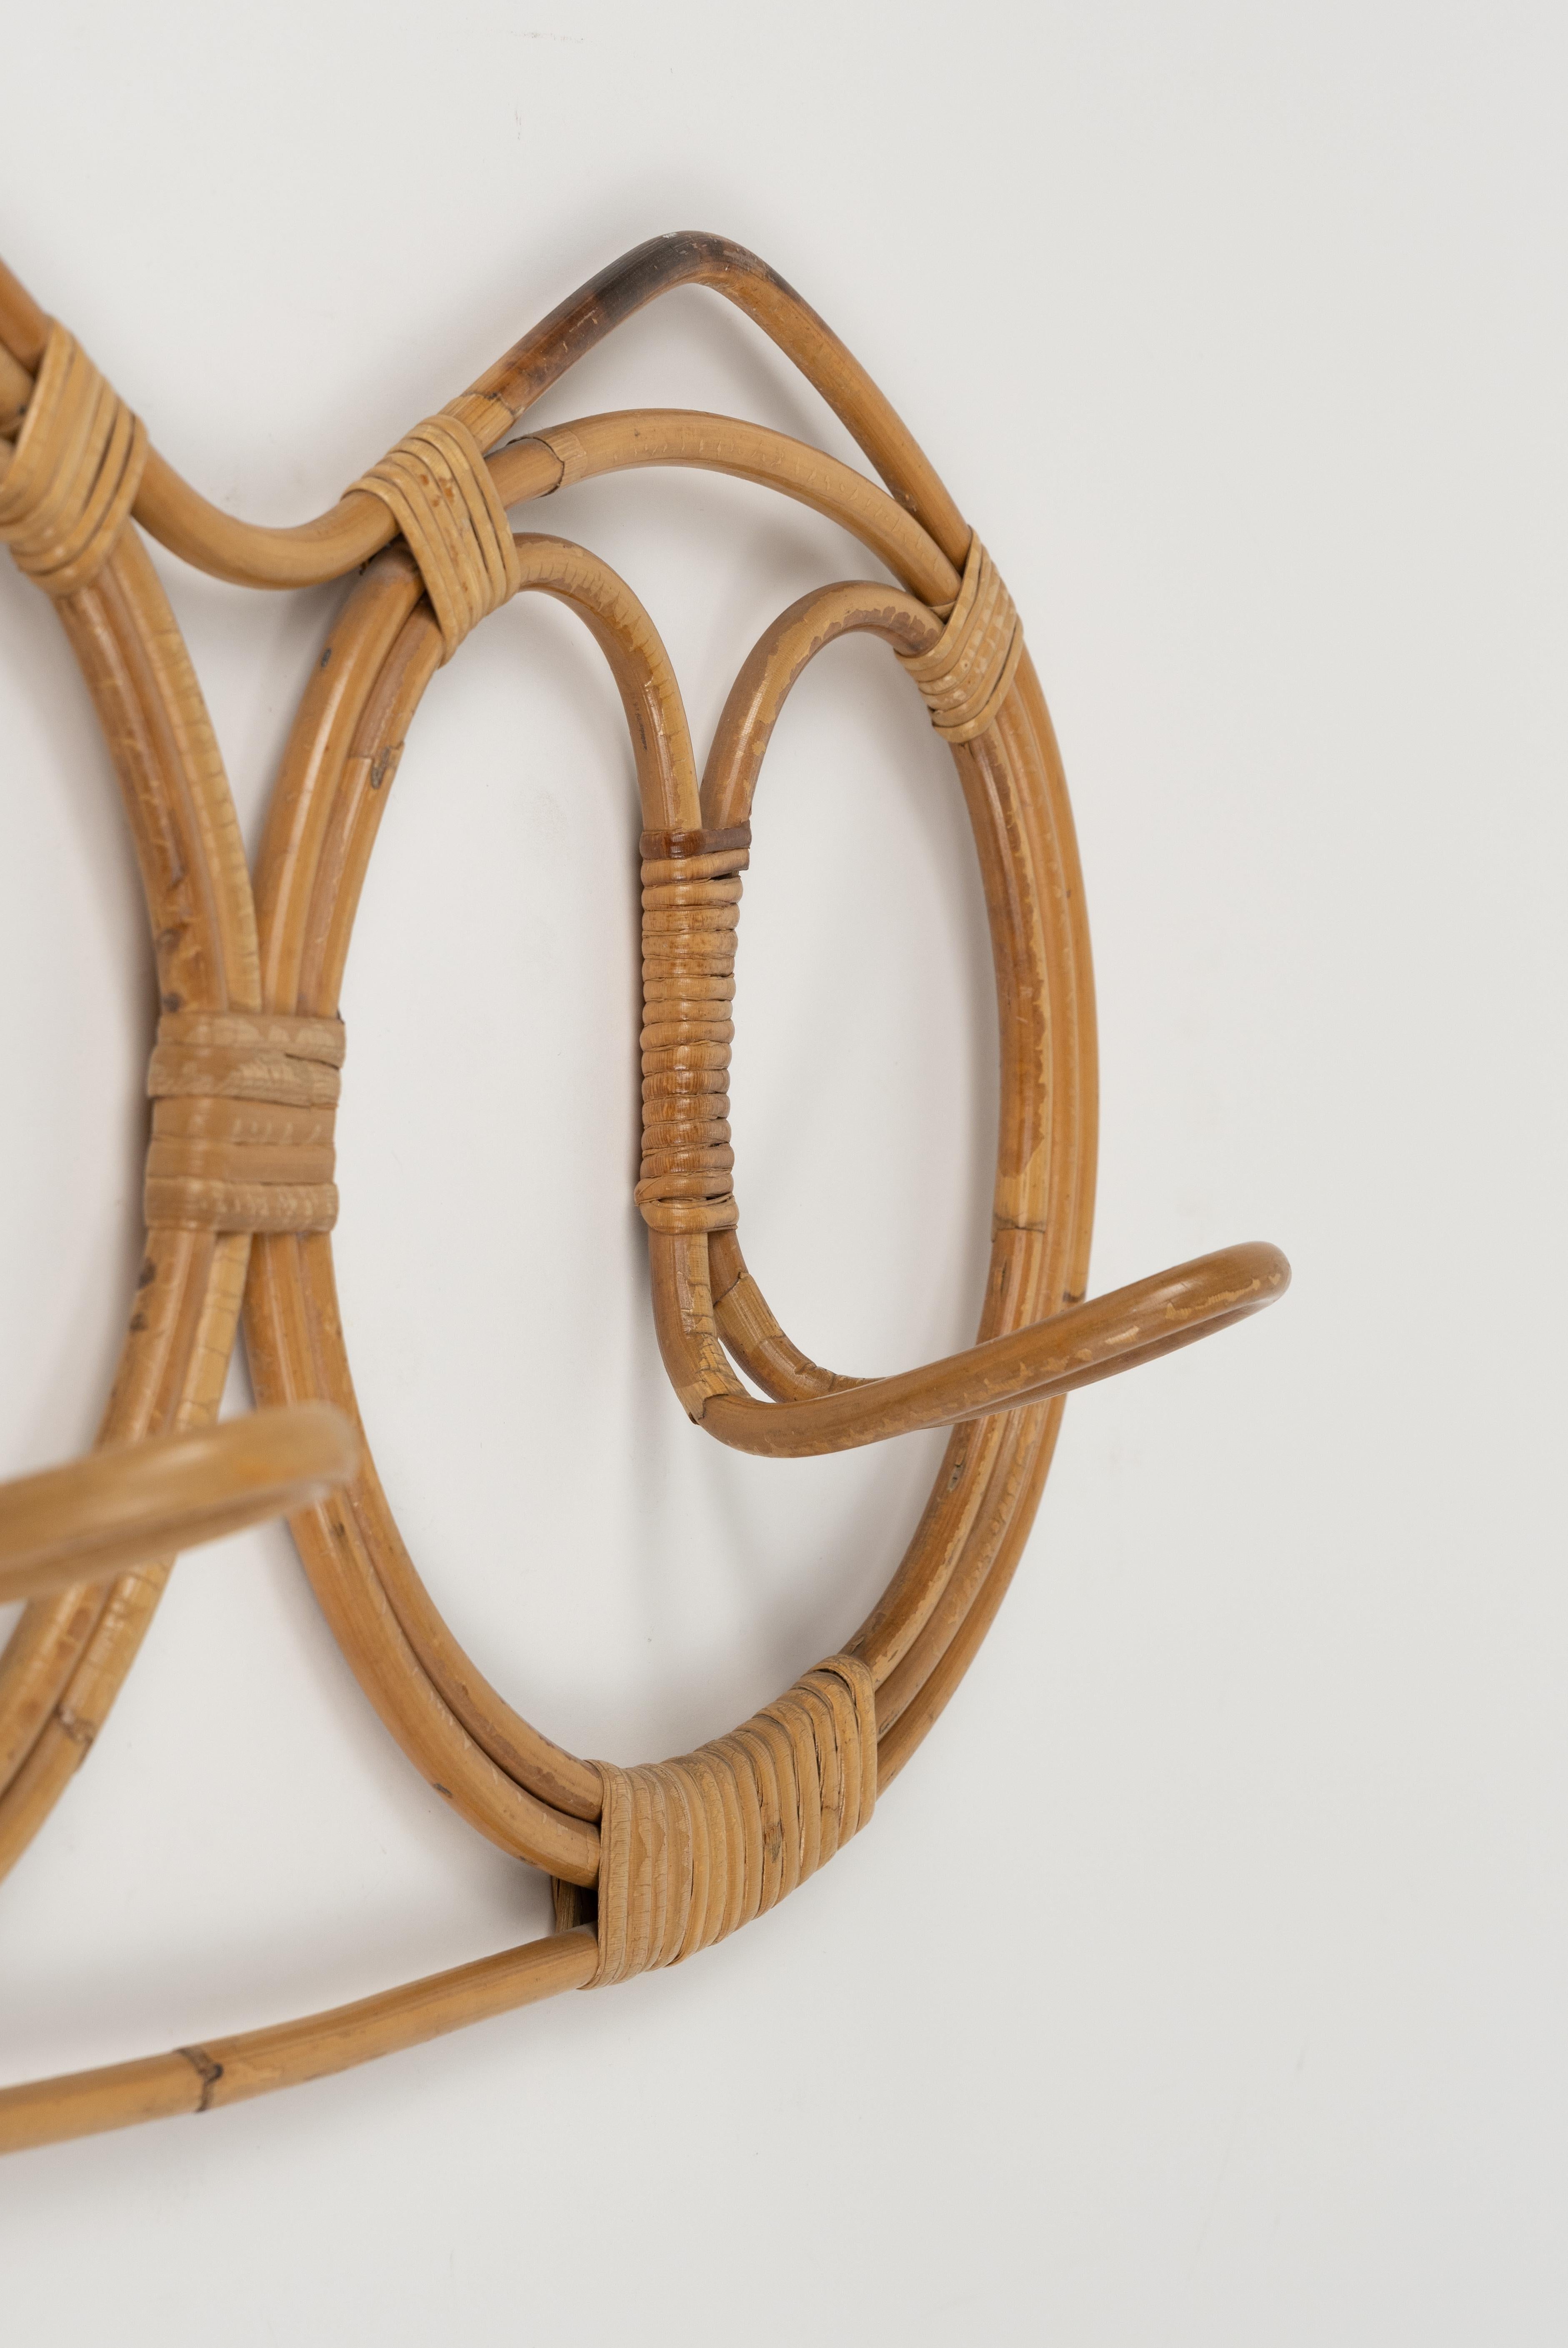 Midcentury Wall Coat Rack in Bamboo and Rattan by Franco Albini, Italy 1960s For Sale 9